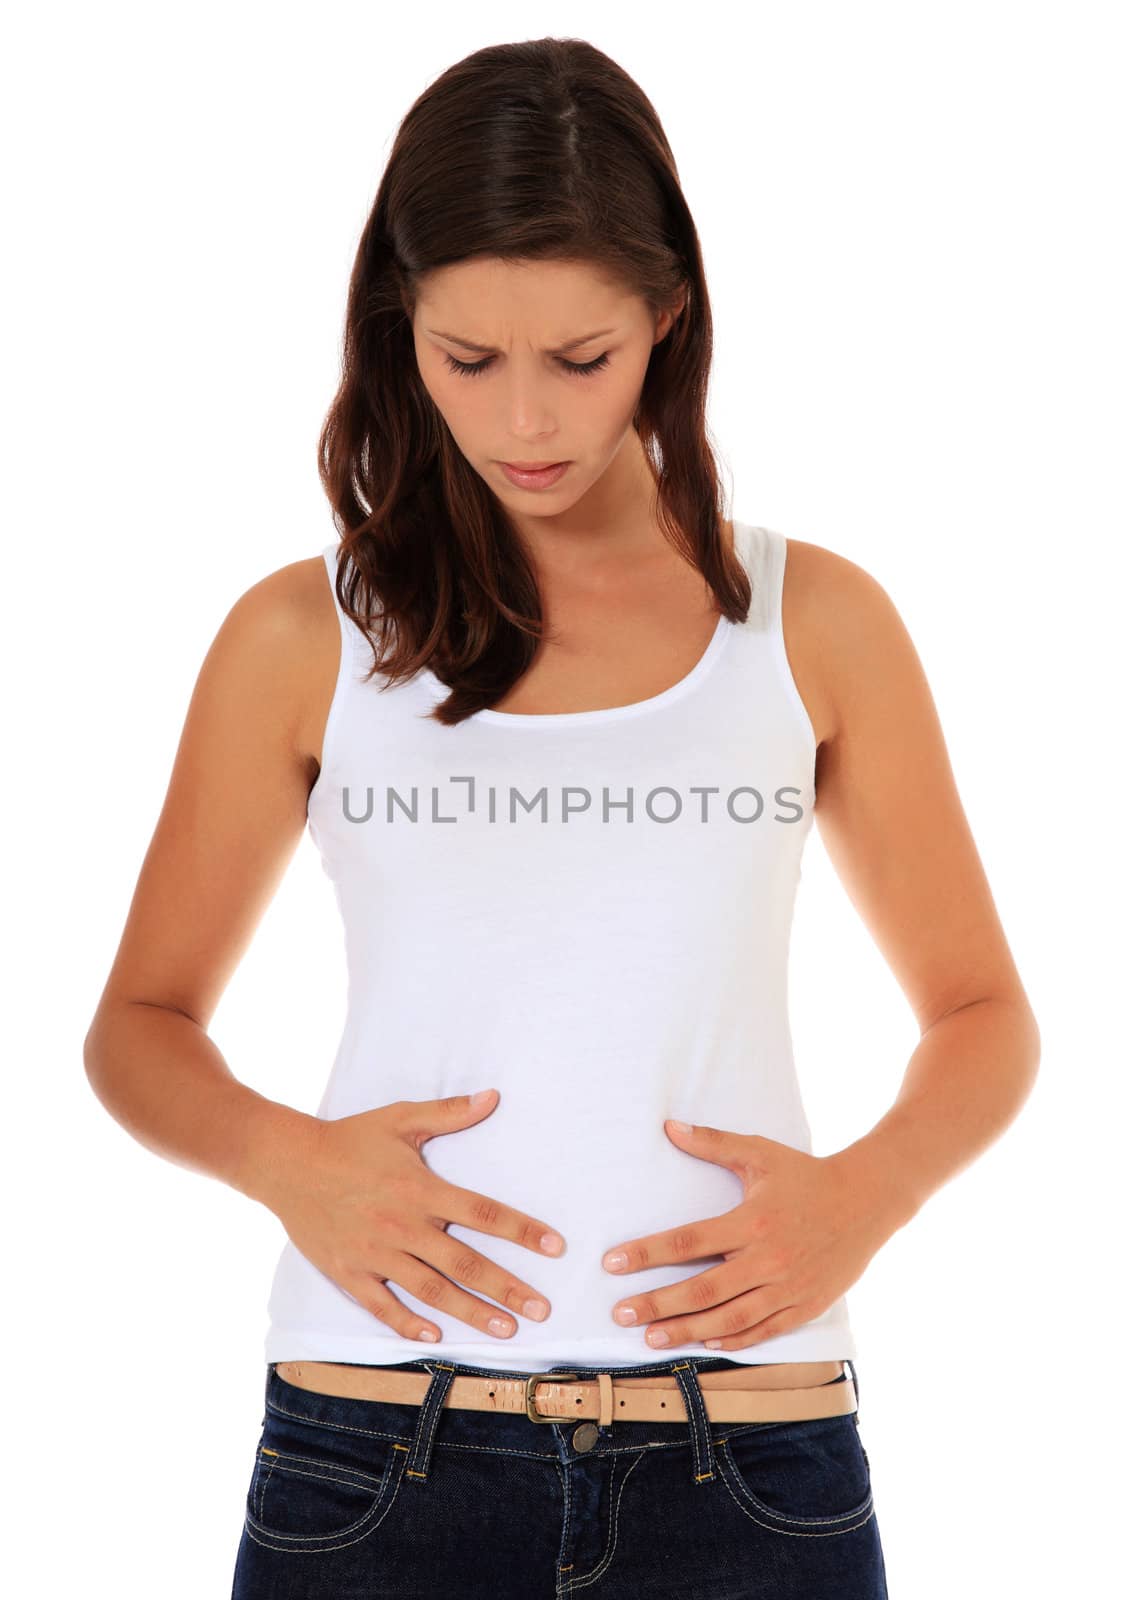 Attractive young woman suffers from stomachache. All on white background.